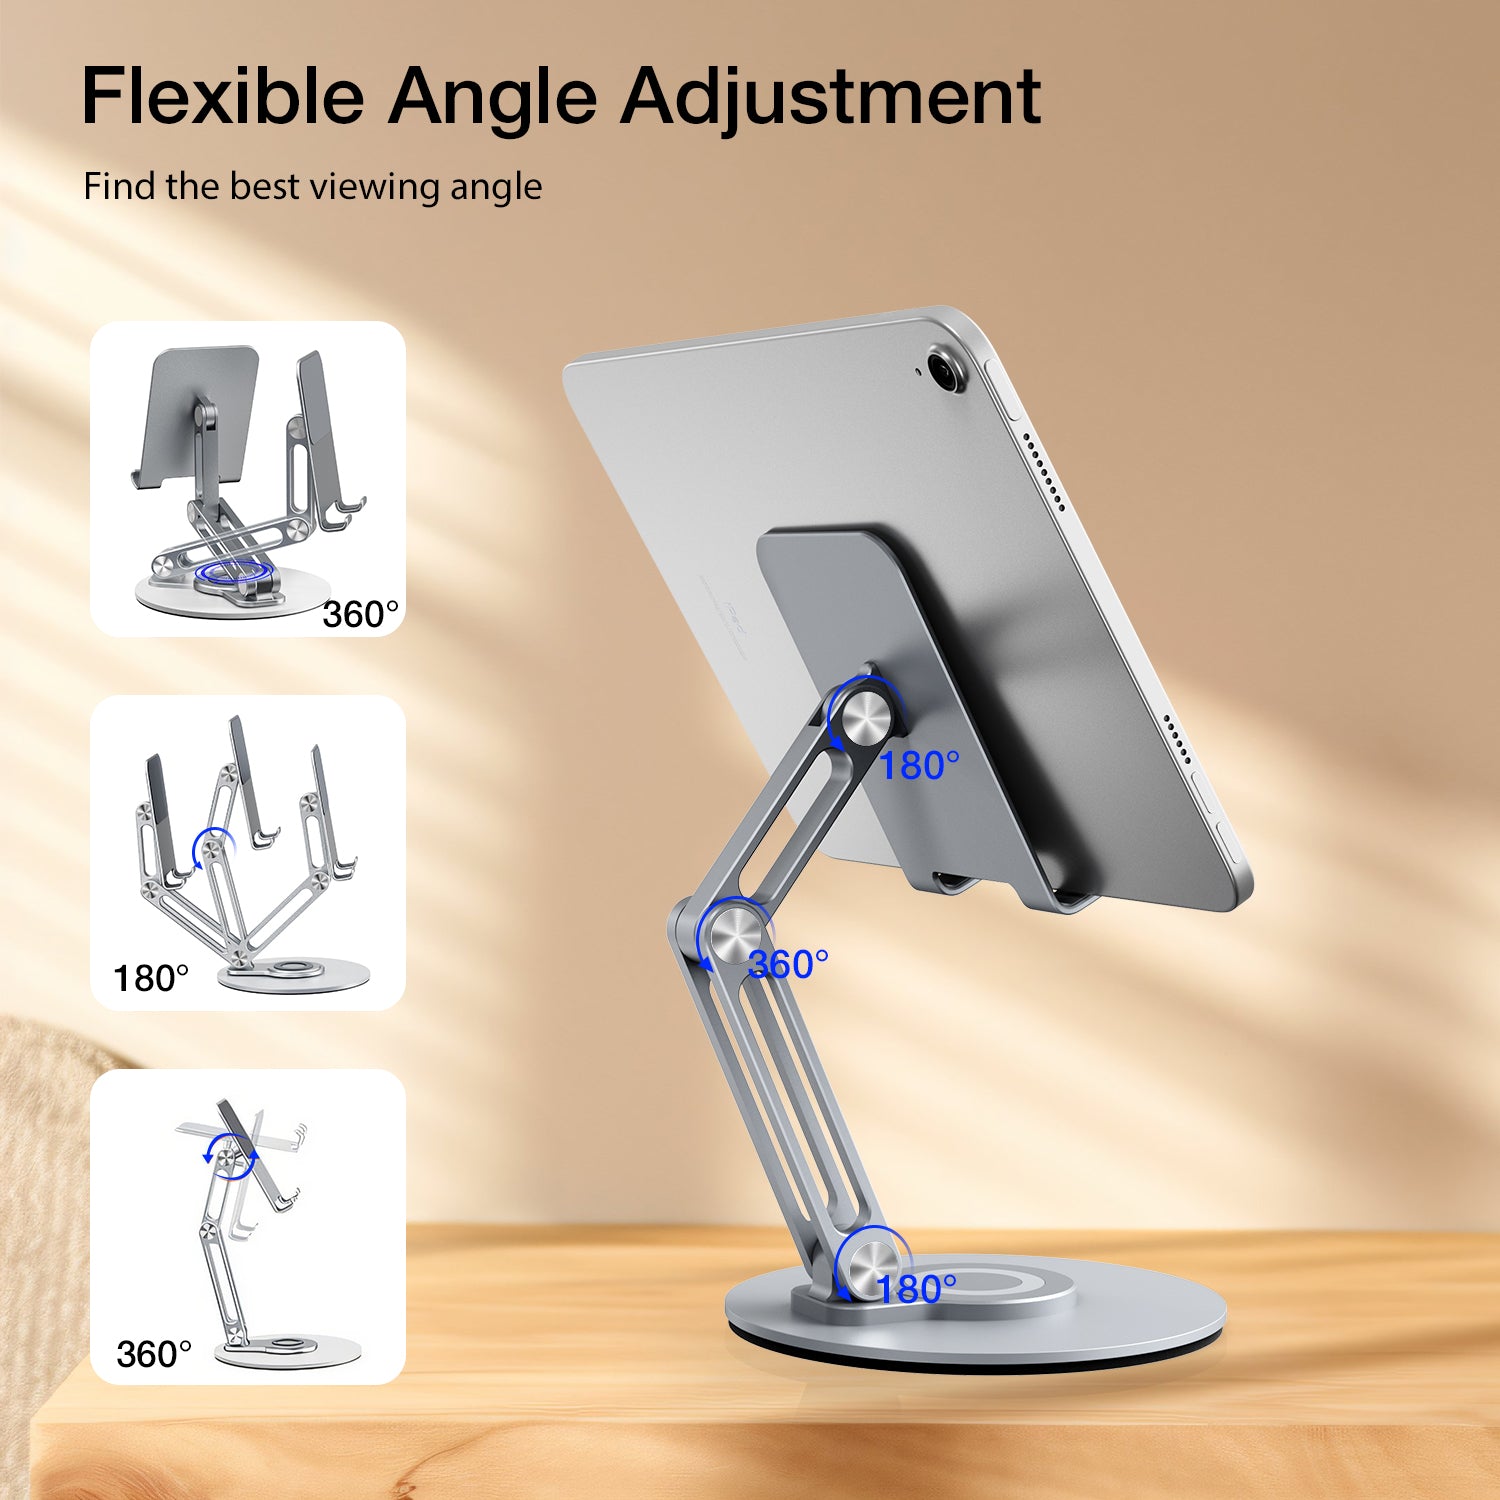 Phone Stand 360 Rotating Foldable Phone Holder